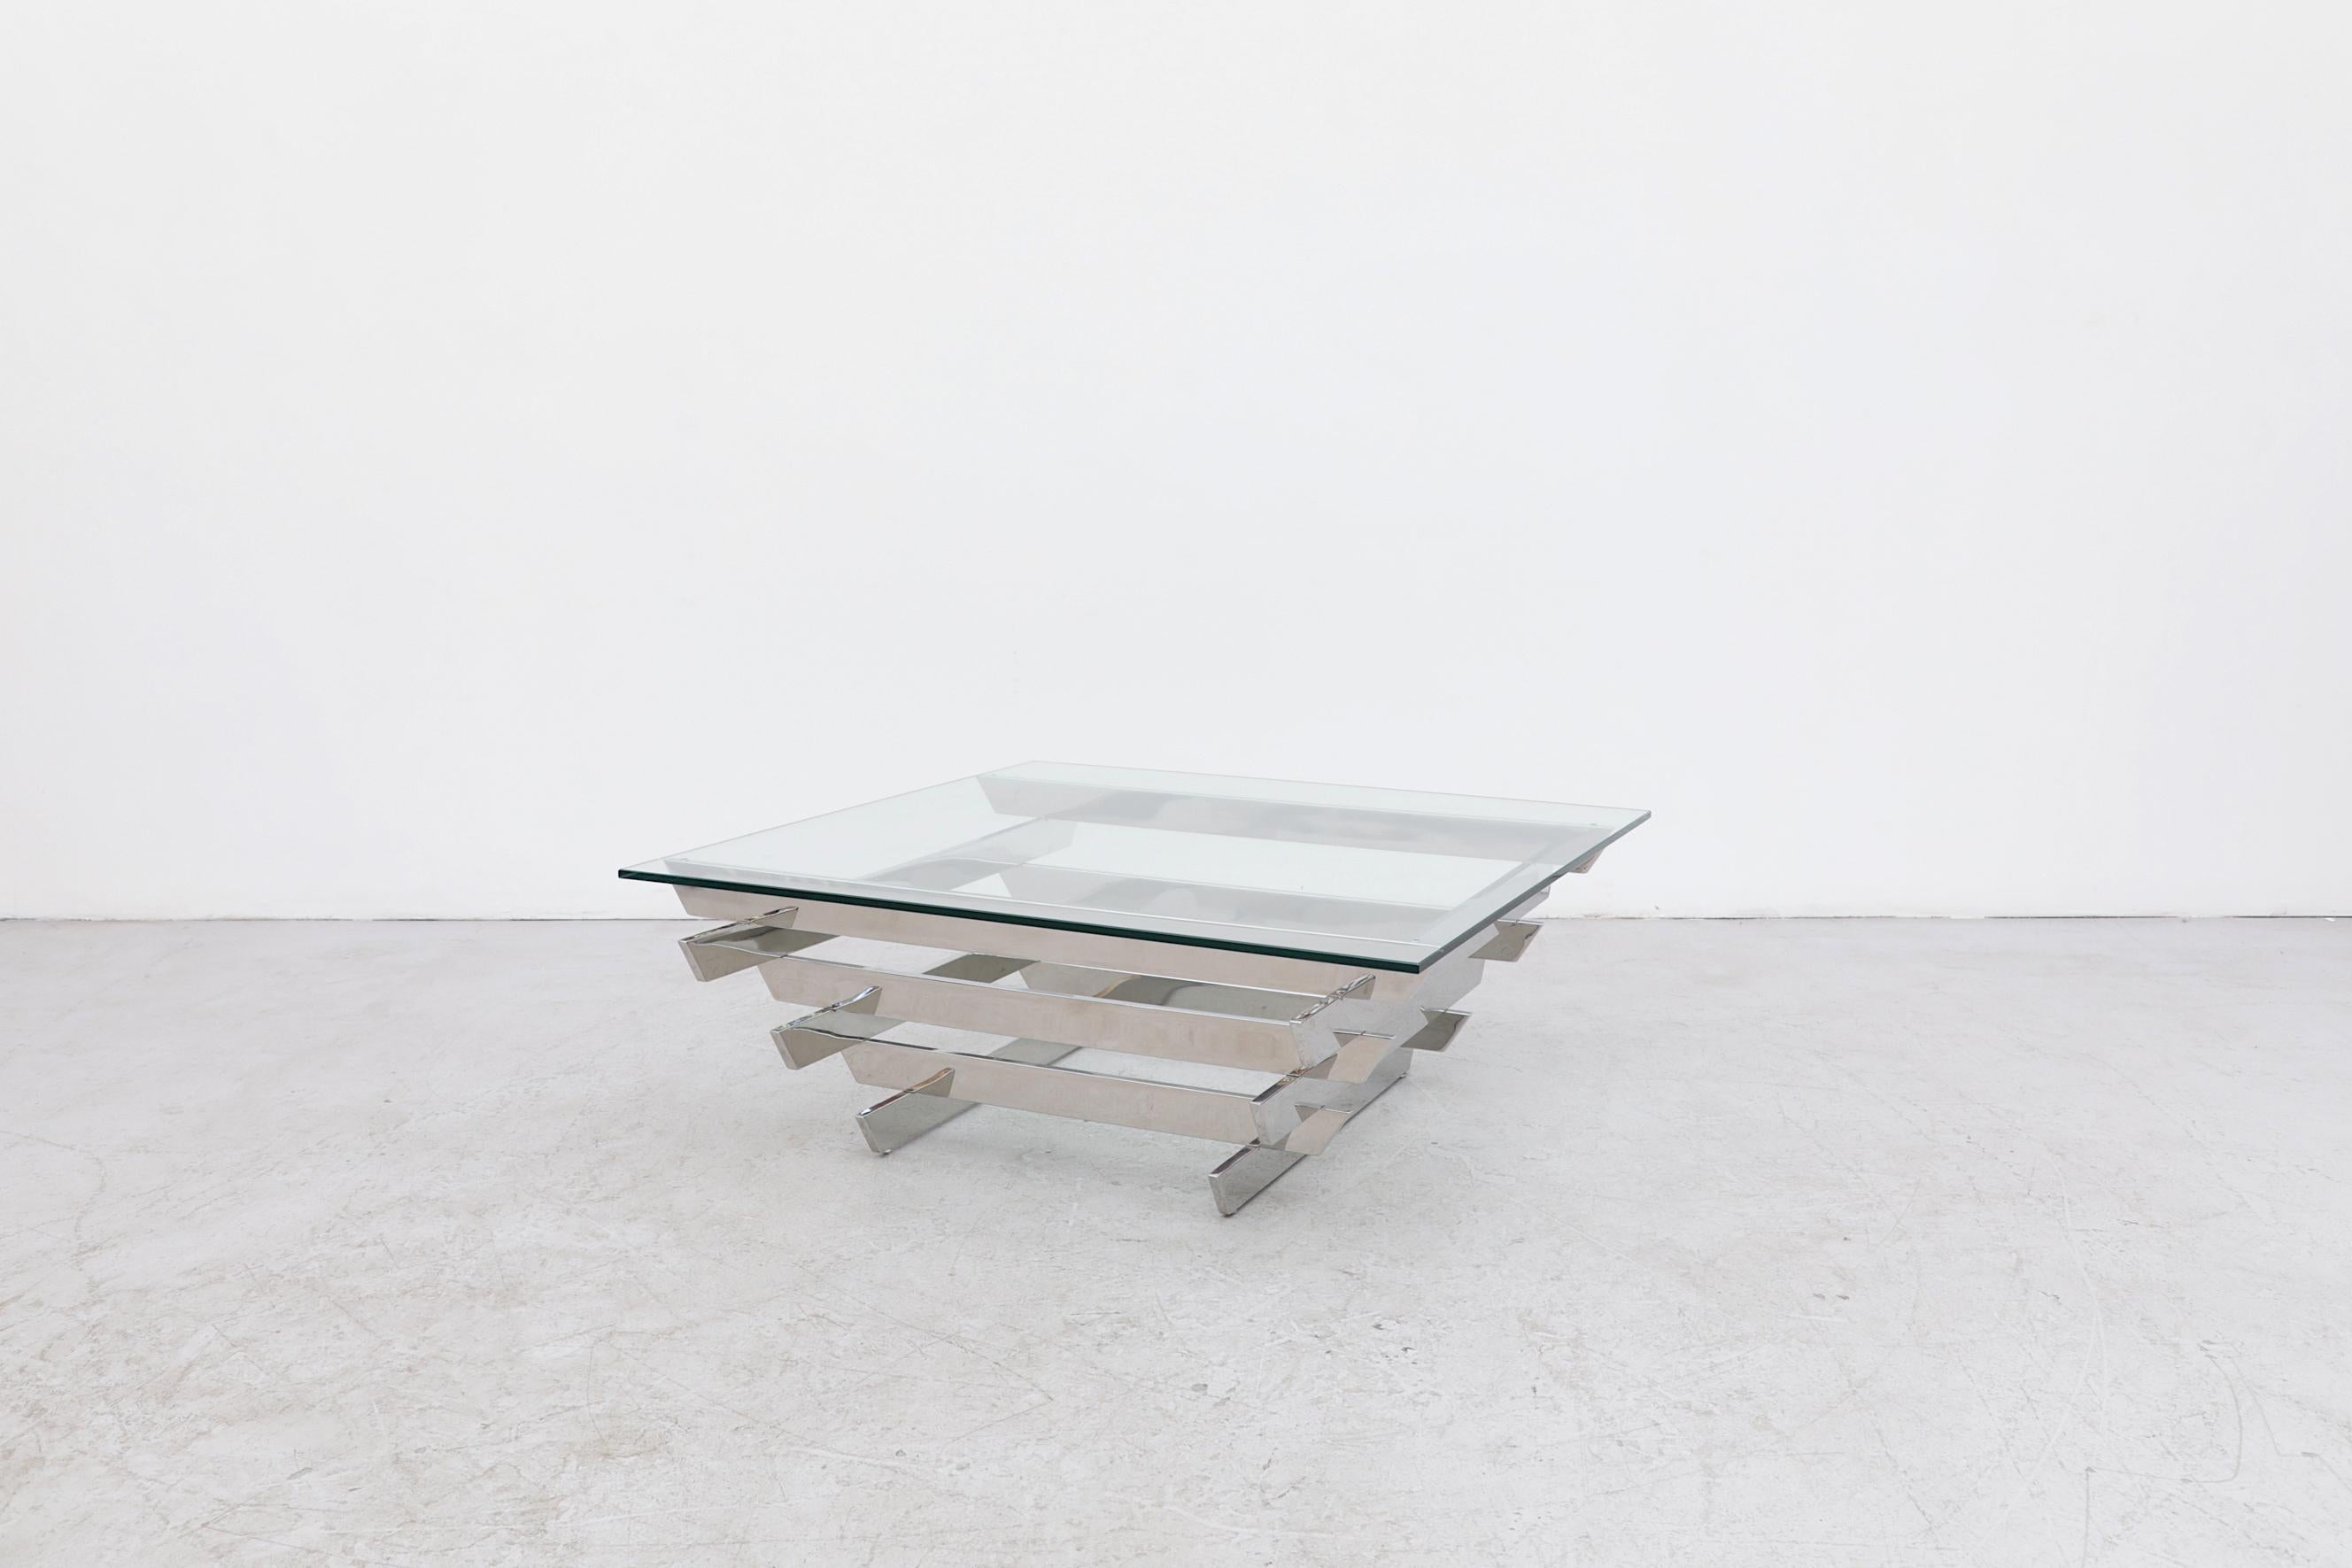 Chrome plated steel coffee table by Paul Mayen for Habitat. In original condition with light wear, consistent with its age and use.